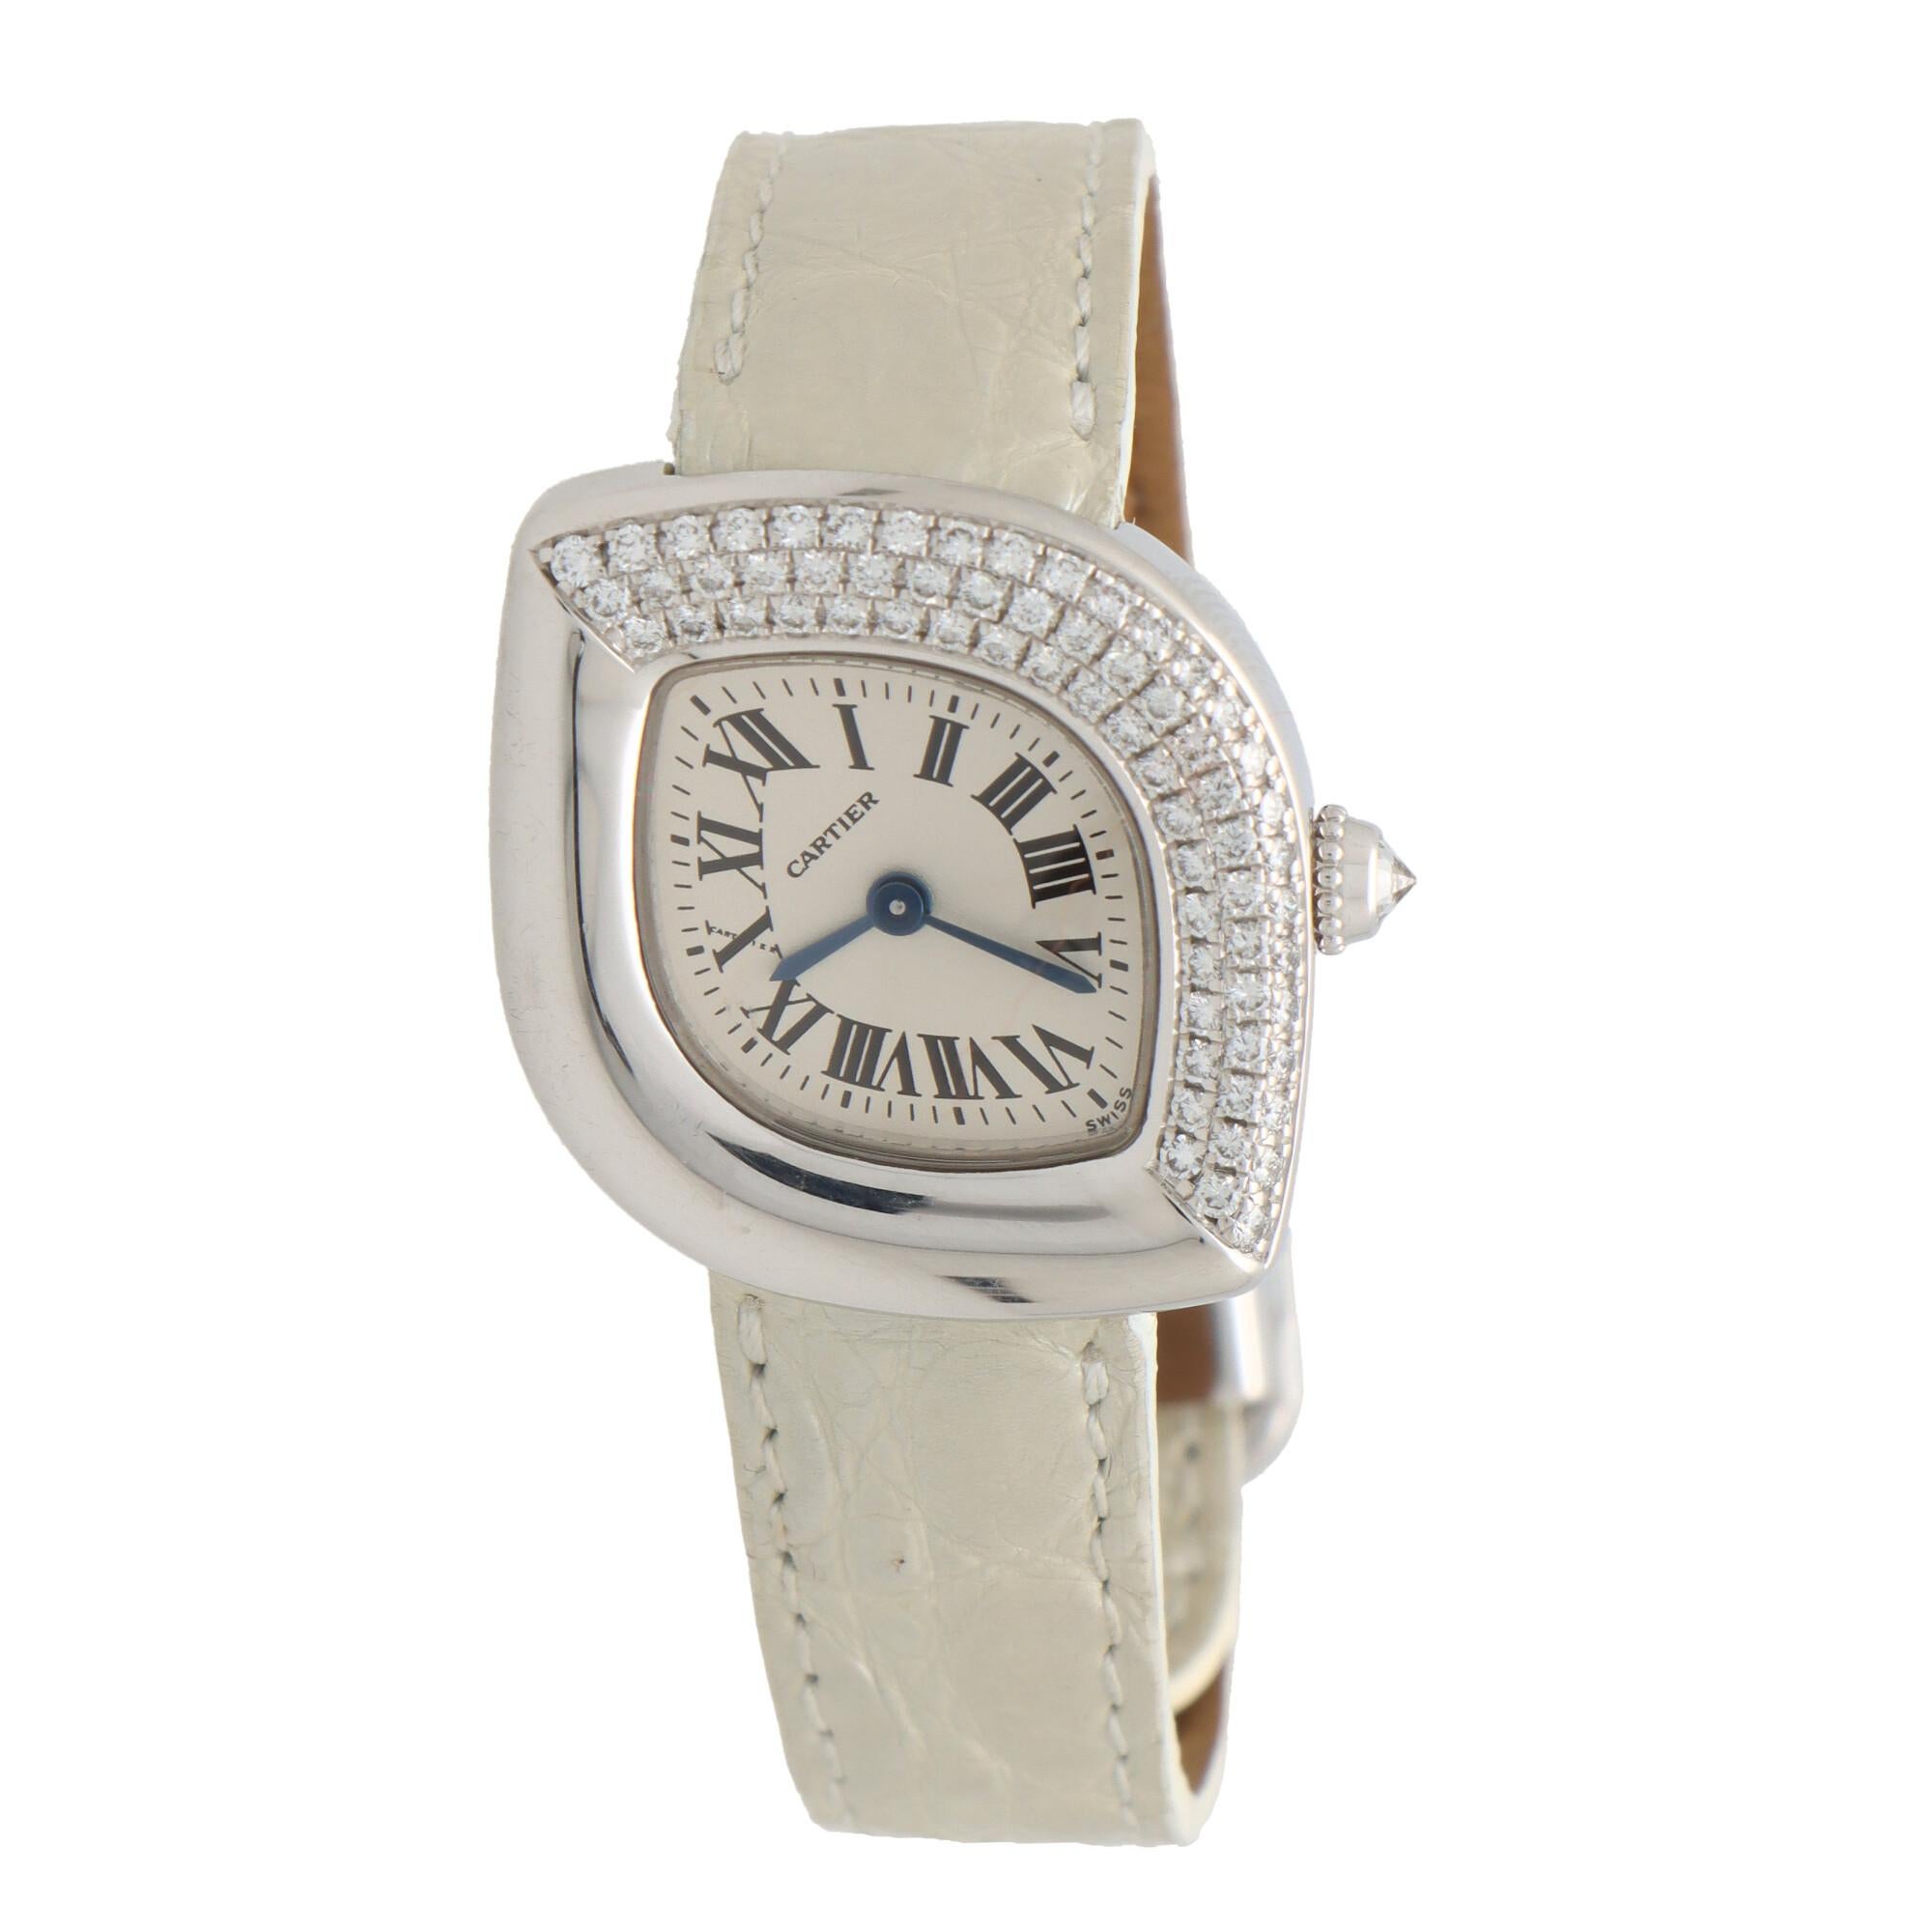 A beautiful vintage Cartier ‘Navette’ diamond wristwatch set in 18k white gold and diamonds. 

The watch features an offset Navette shaped case measuring 25-millimetres in diameter with one side of the case being pave set with round brilliant cut